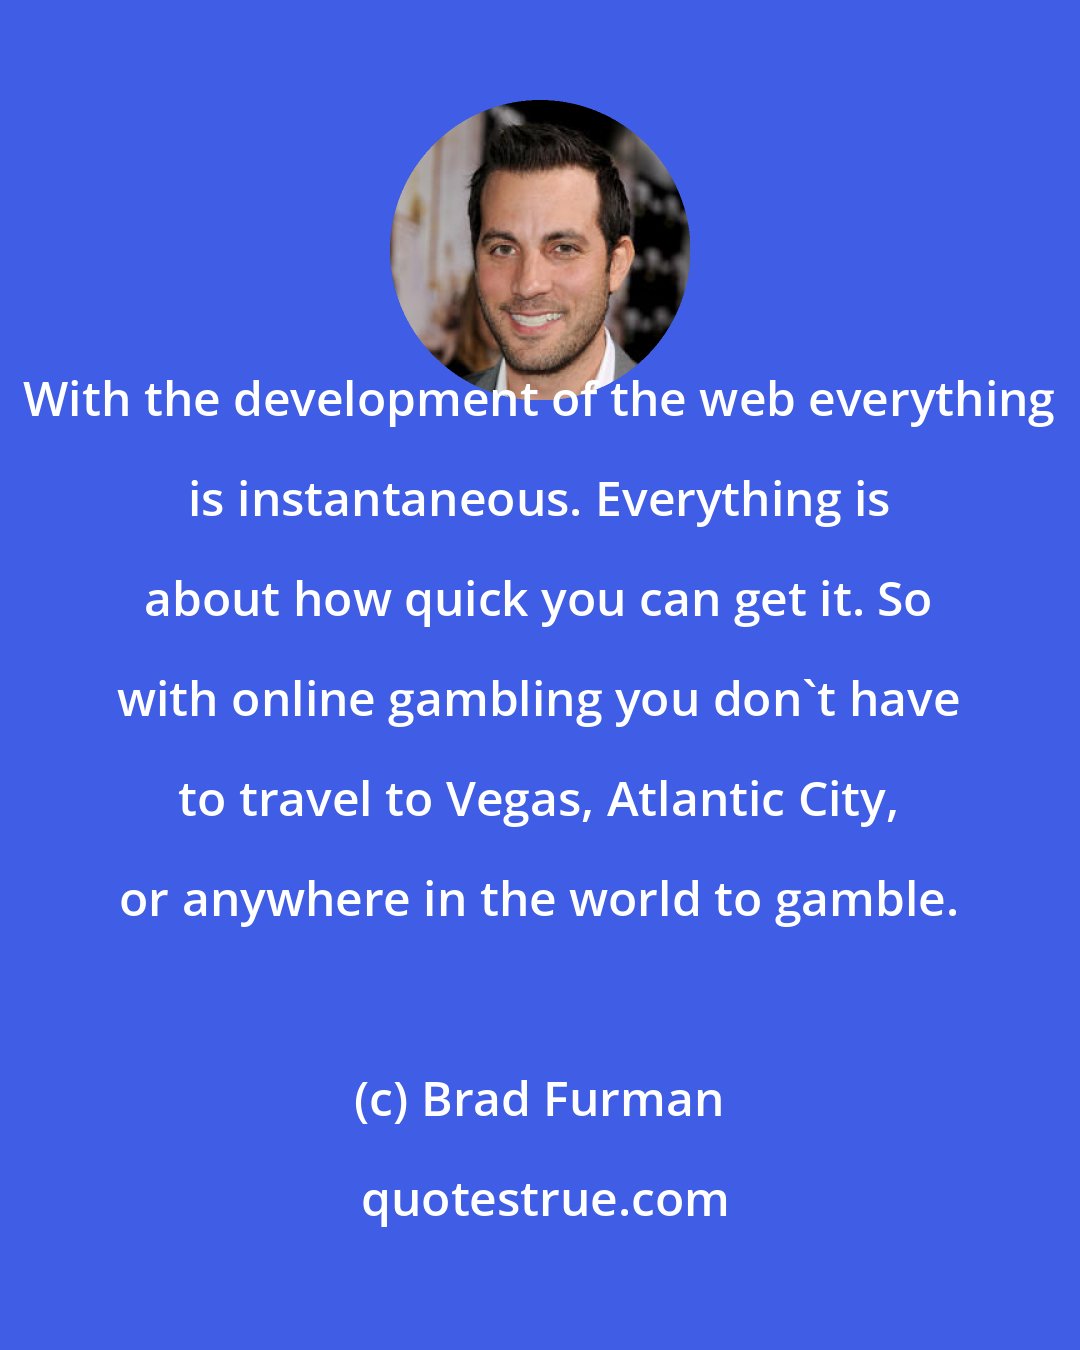 Brad Furman: With the development of the web everything is instantaneous. Everything is about how quick you can get it. So with online gambling you don't have to travel to Vegas, Atlantic City, or anywhere in the world to gamble.